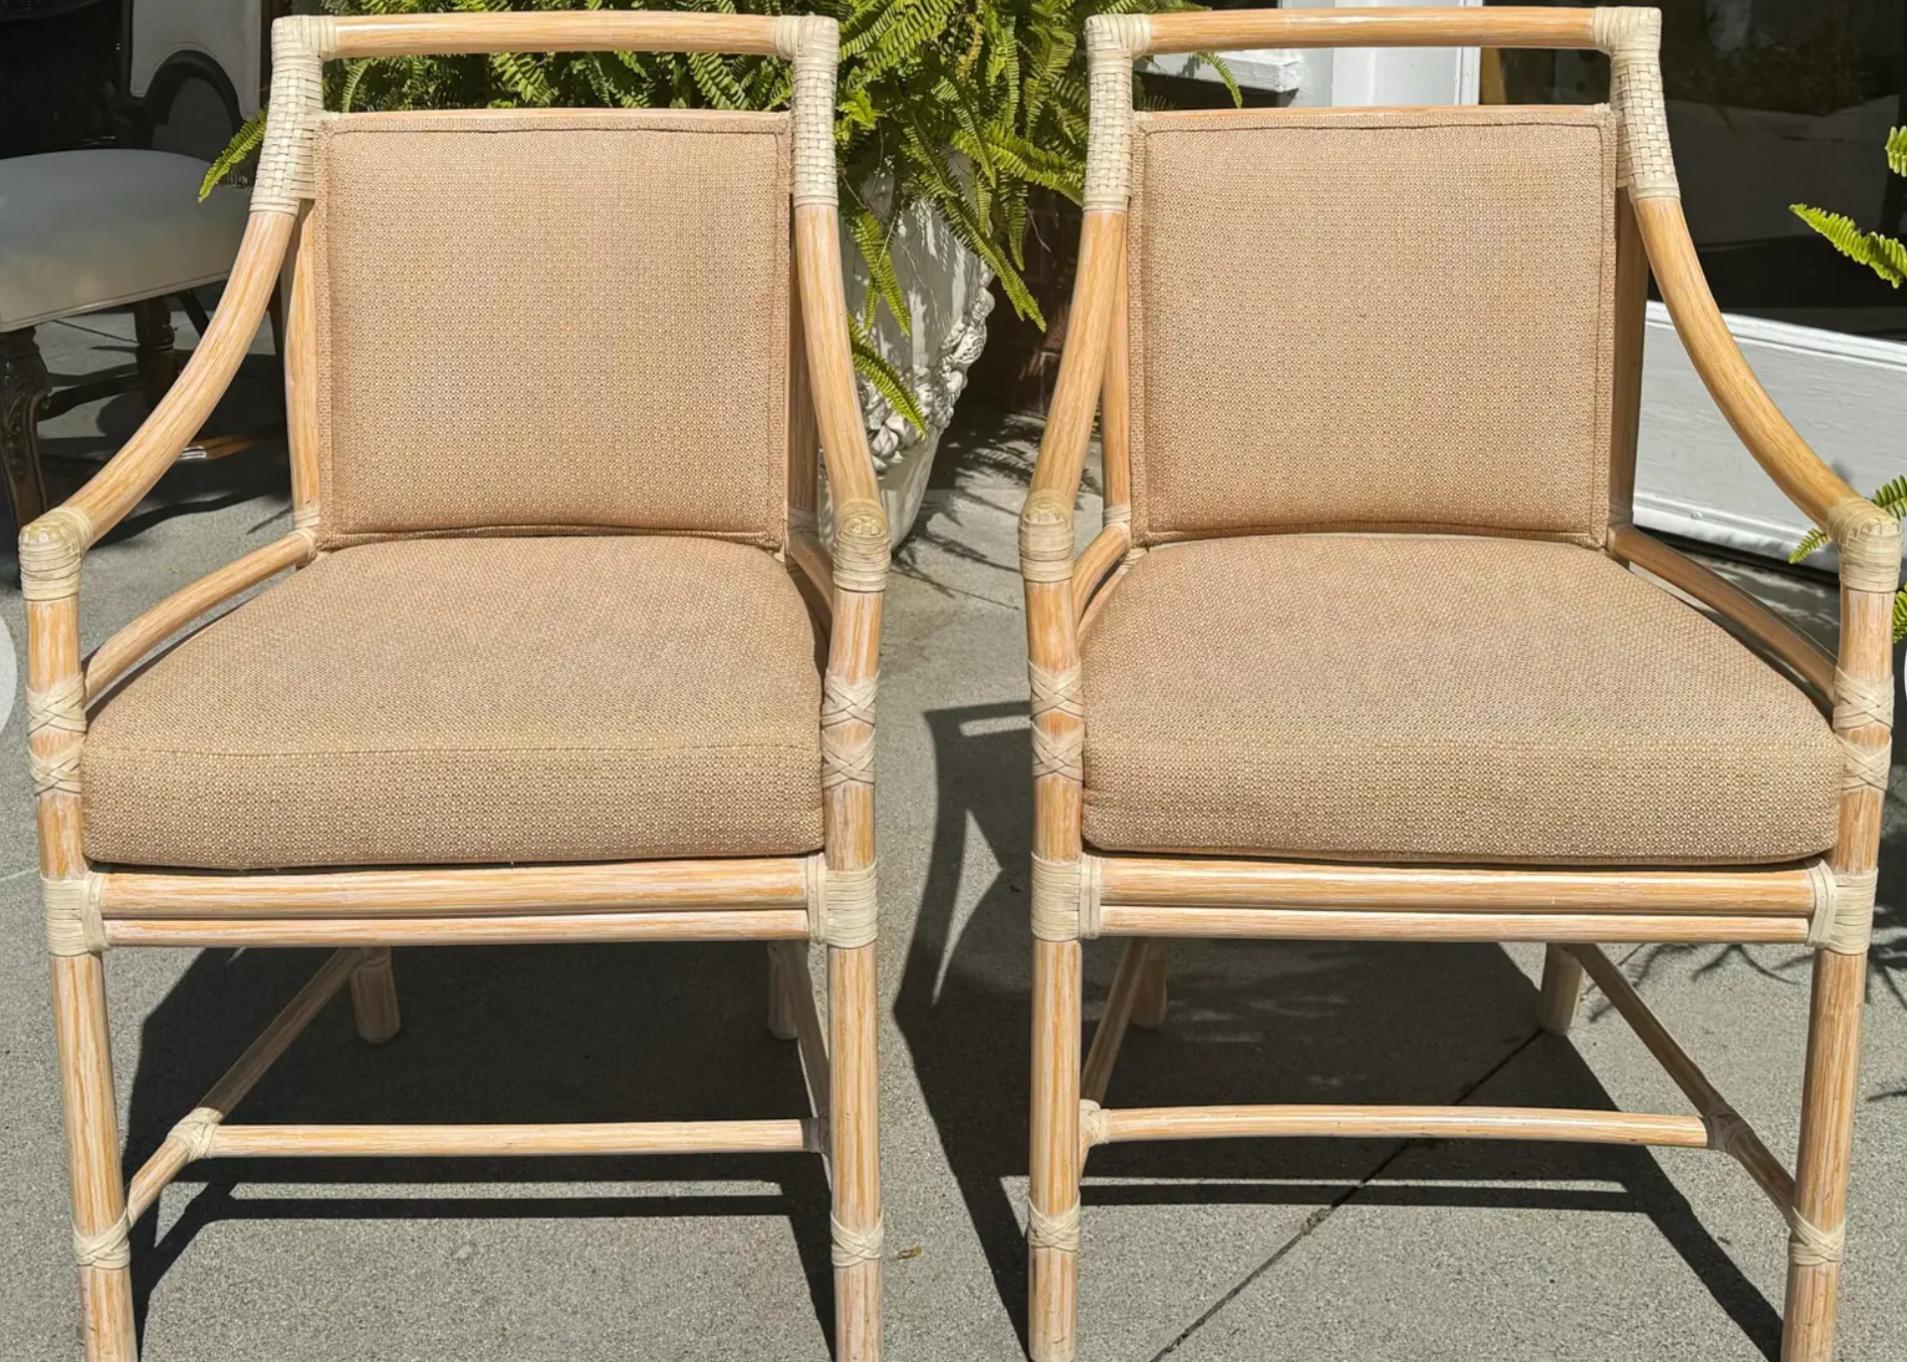 Pair of McGuire Furniture Company Bamboo Arm Chairs. This listing is for one pair of chairs but we actually have four pair available. 